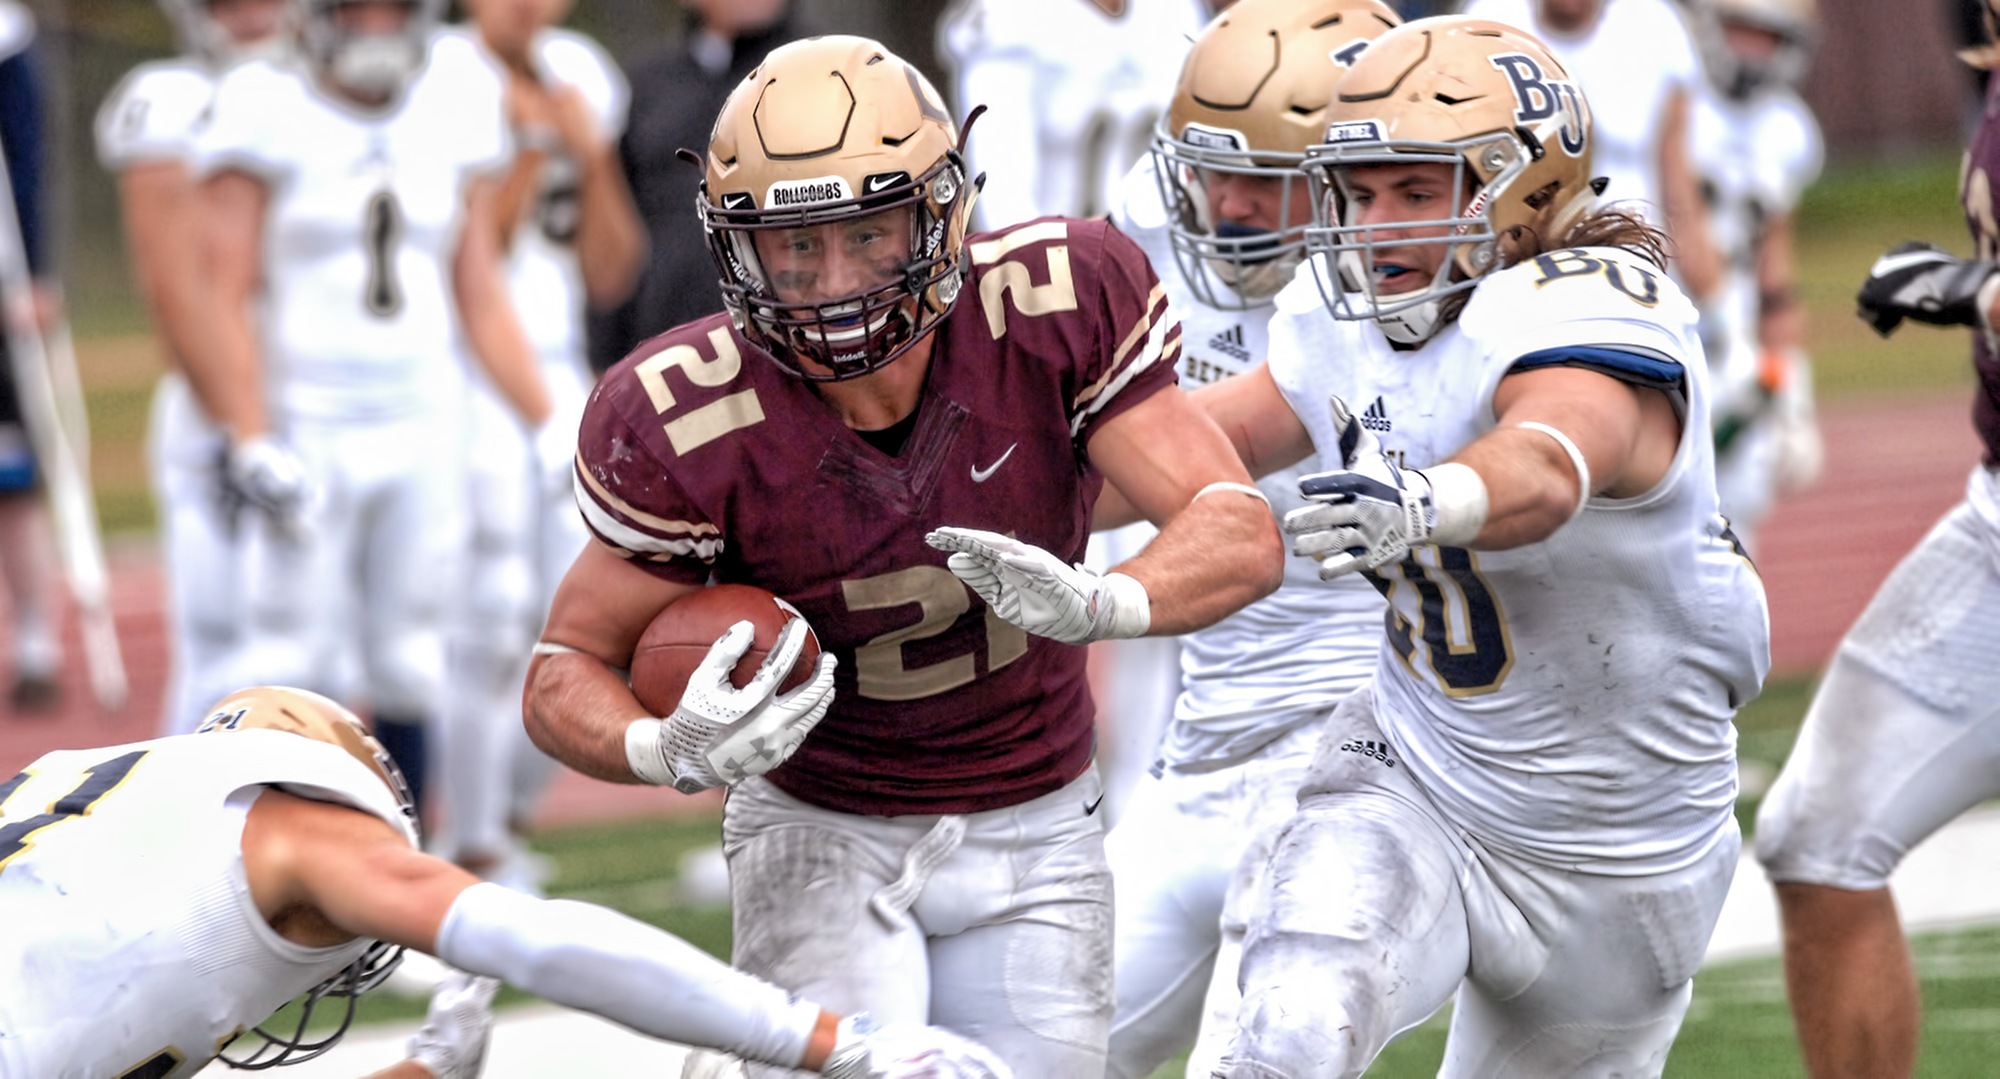 Chad Johnson breaks through three Bethel tacklers on his way to rushing for 191 yards in the MIAC-opening win for the Cobbers.